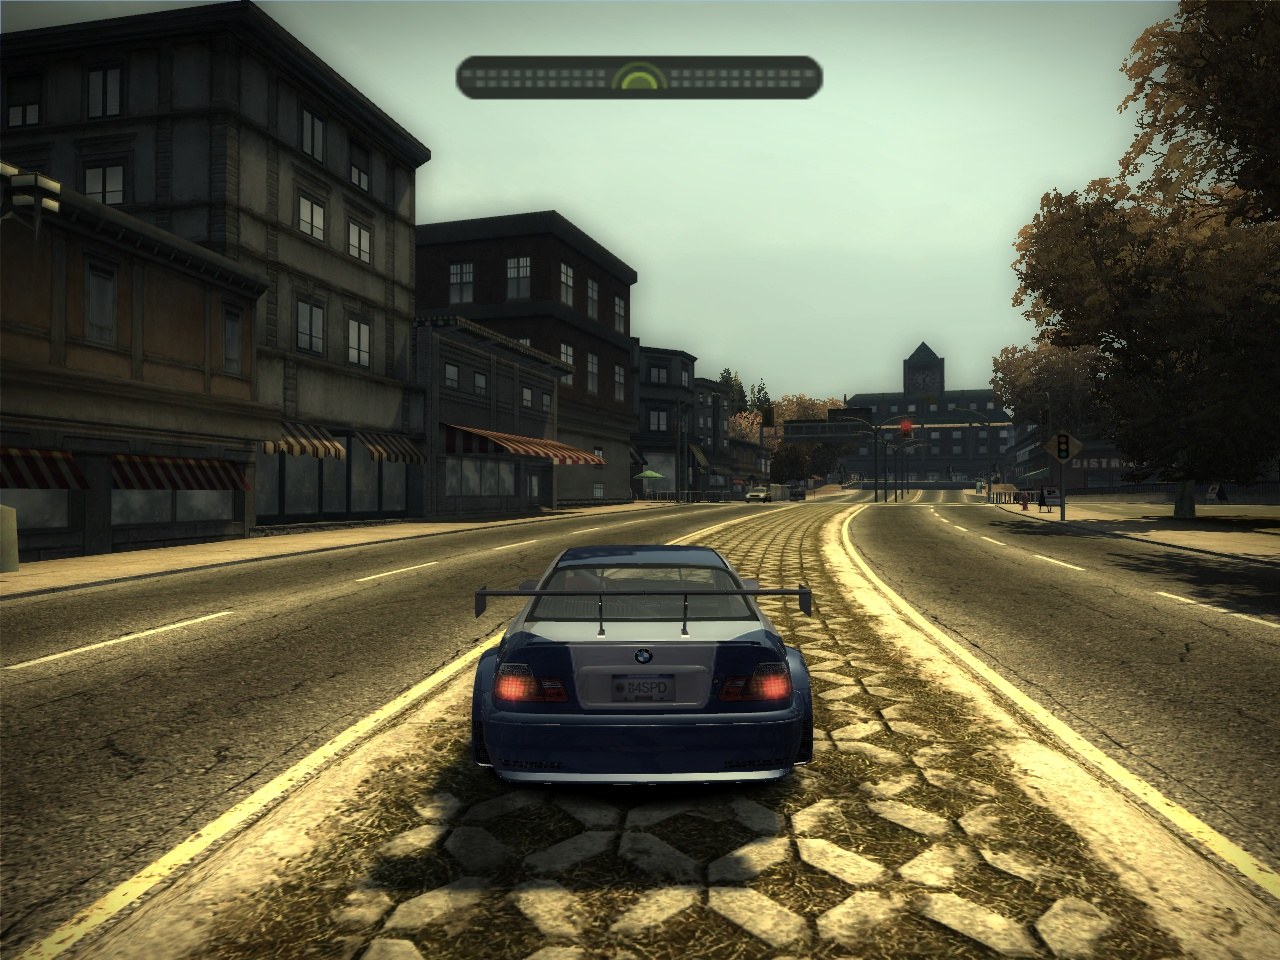 Most wanted hq. Need for Speed most wanted 2005. Нфс most wanted. NFS most wanted 2005 мост. Игра NFS most wanted 2005.